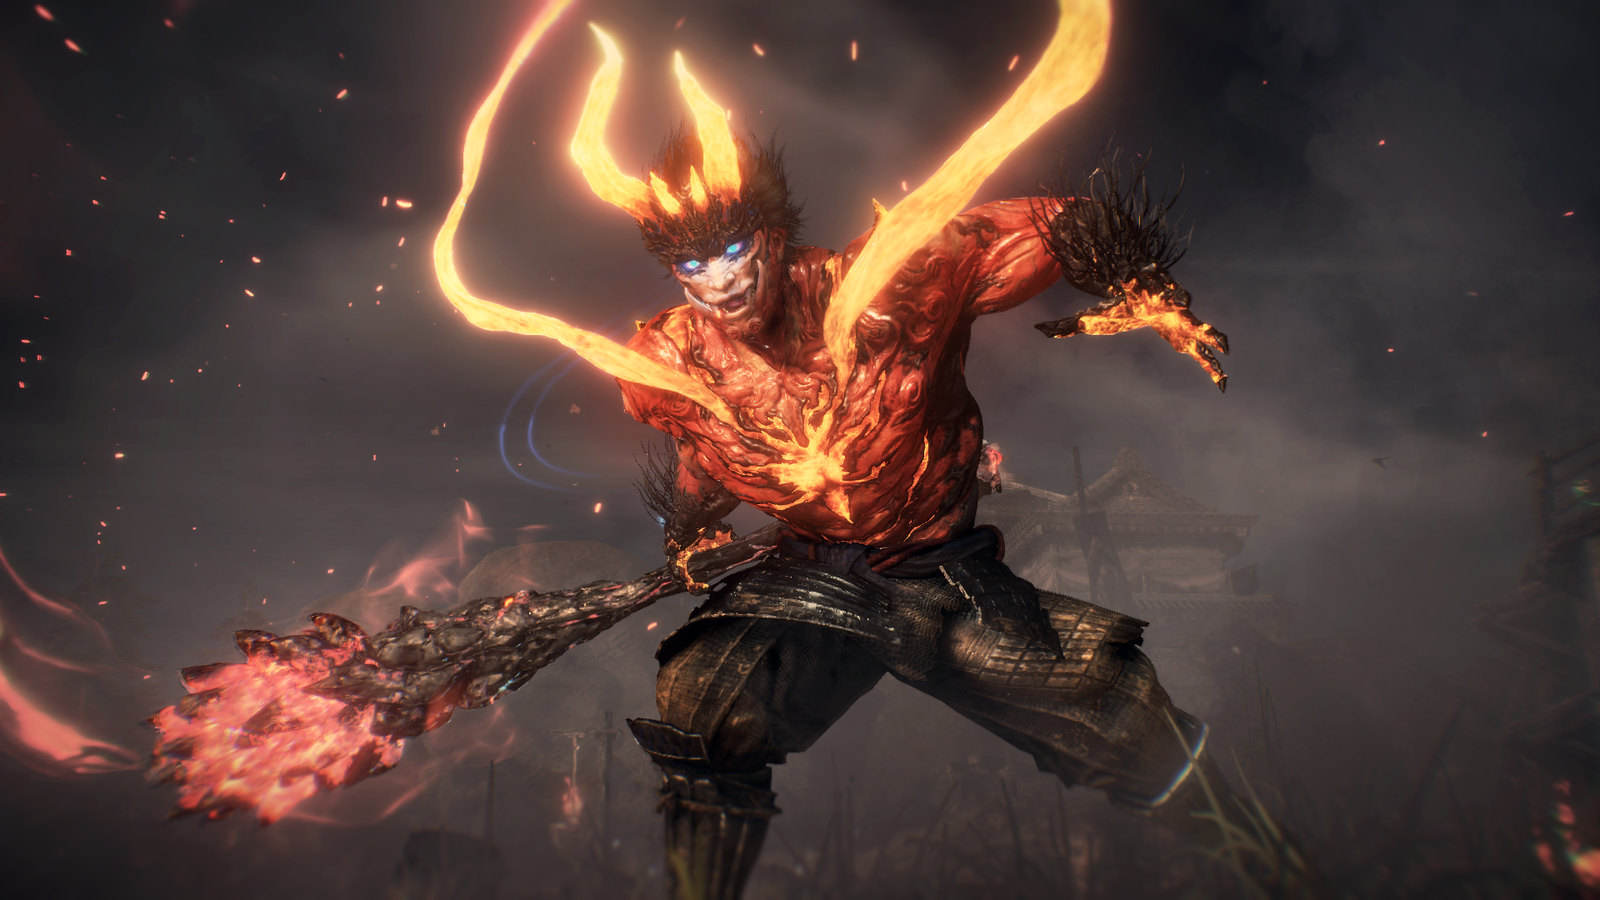 Nioh 2 Has New Art That Shows Off the Beastly Transformations And Epic Battles Yet To Come, More Details Are Finally Released About This Mysterious Game